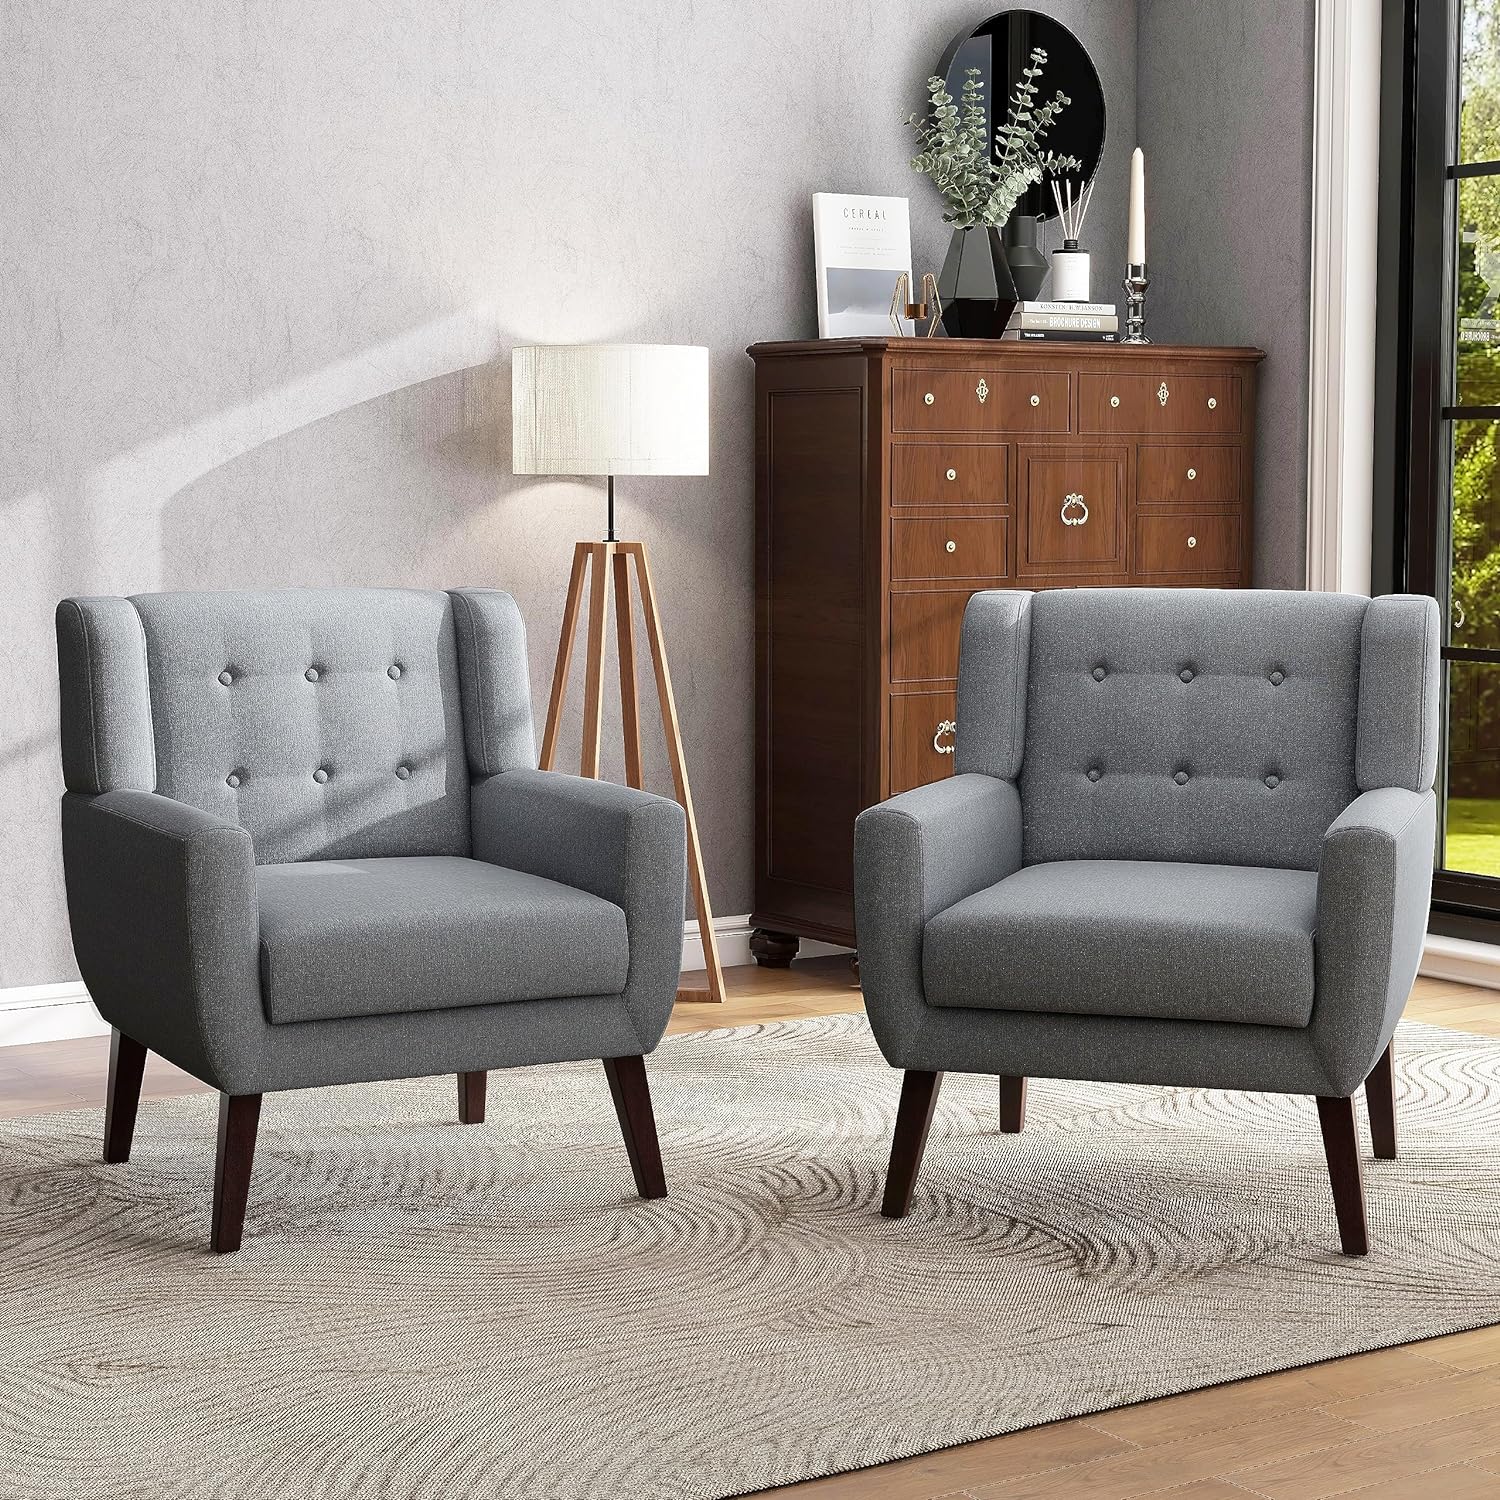 UIXE Modern Accent Chairs Set of 2, Living Room Arm Chair Button Tufted Armchair w/Wood Legs, Comfy Mid Century Upholstered Club Sofa Reading Seat Bedroom Side Seating for Home Office (Grey)